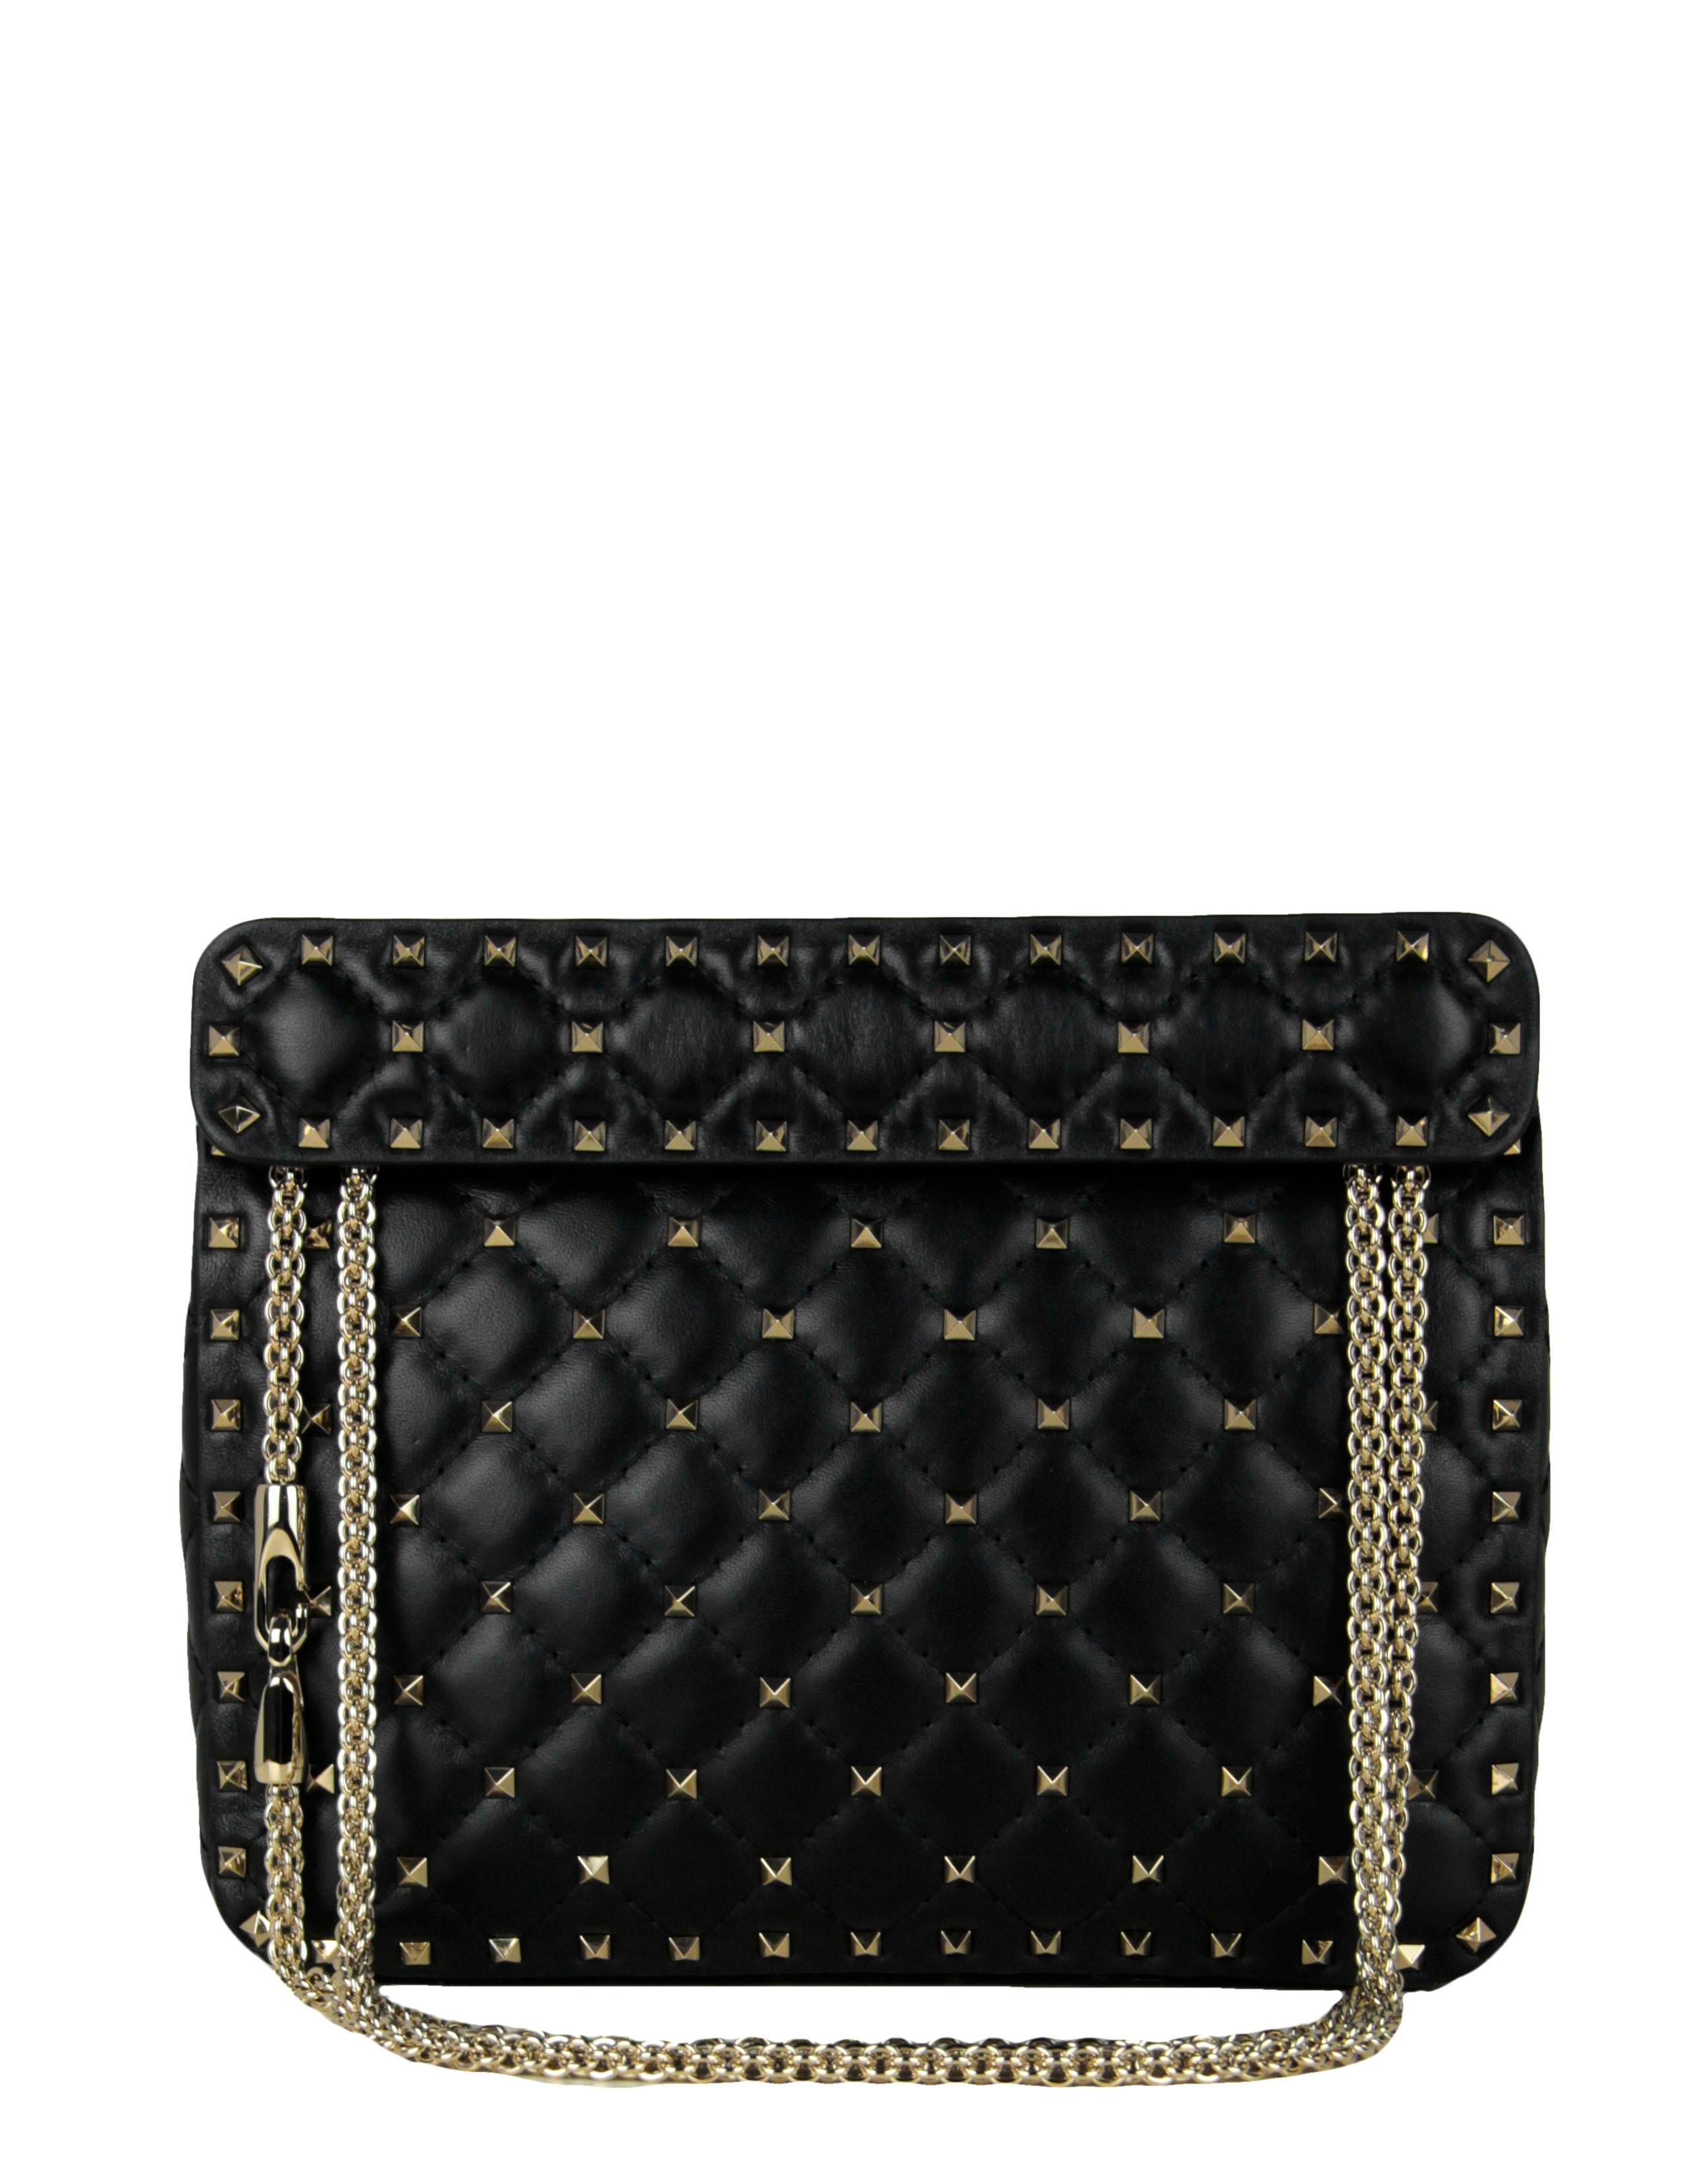 black valentino bag with gold studs